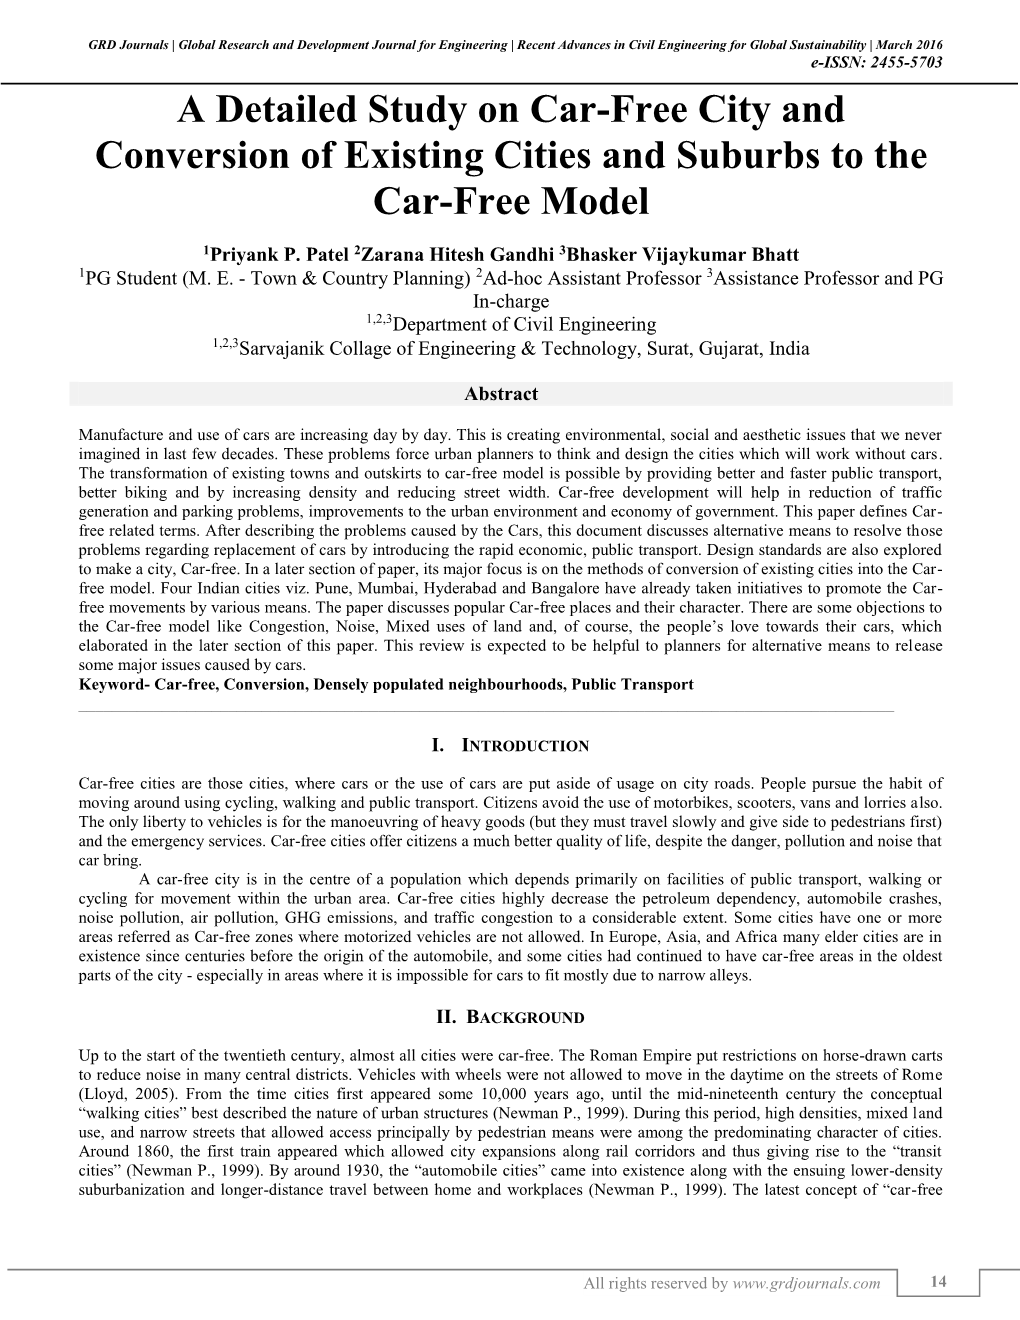 A Detailed Study on Car-Free City and Conversion of Existing Cities and Suburbs to The